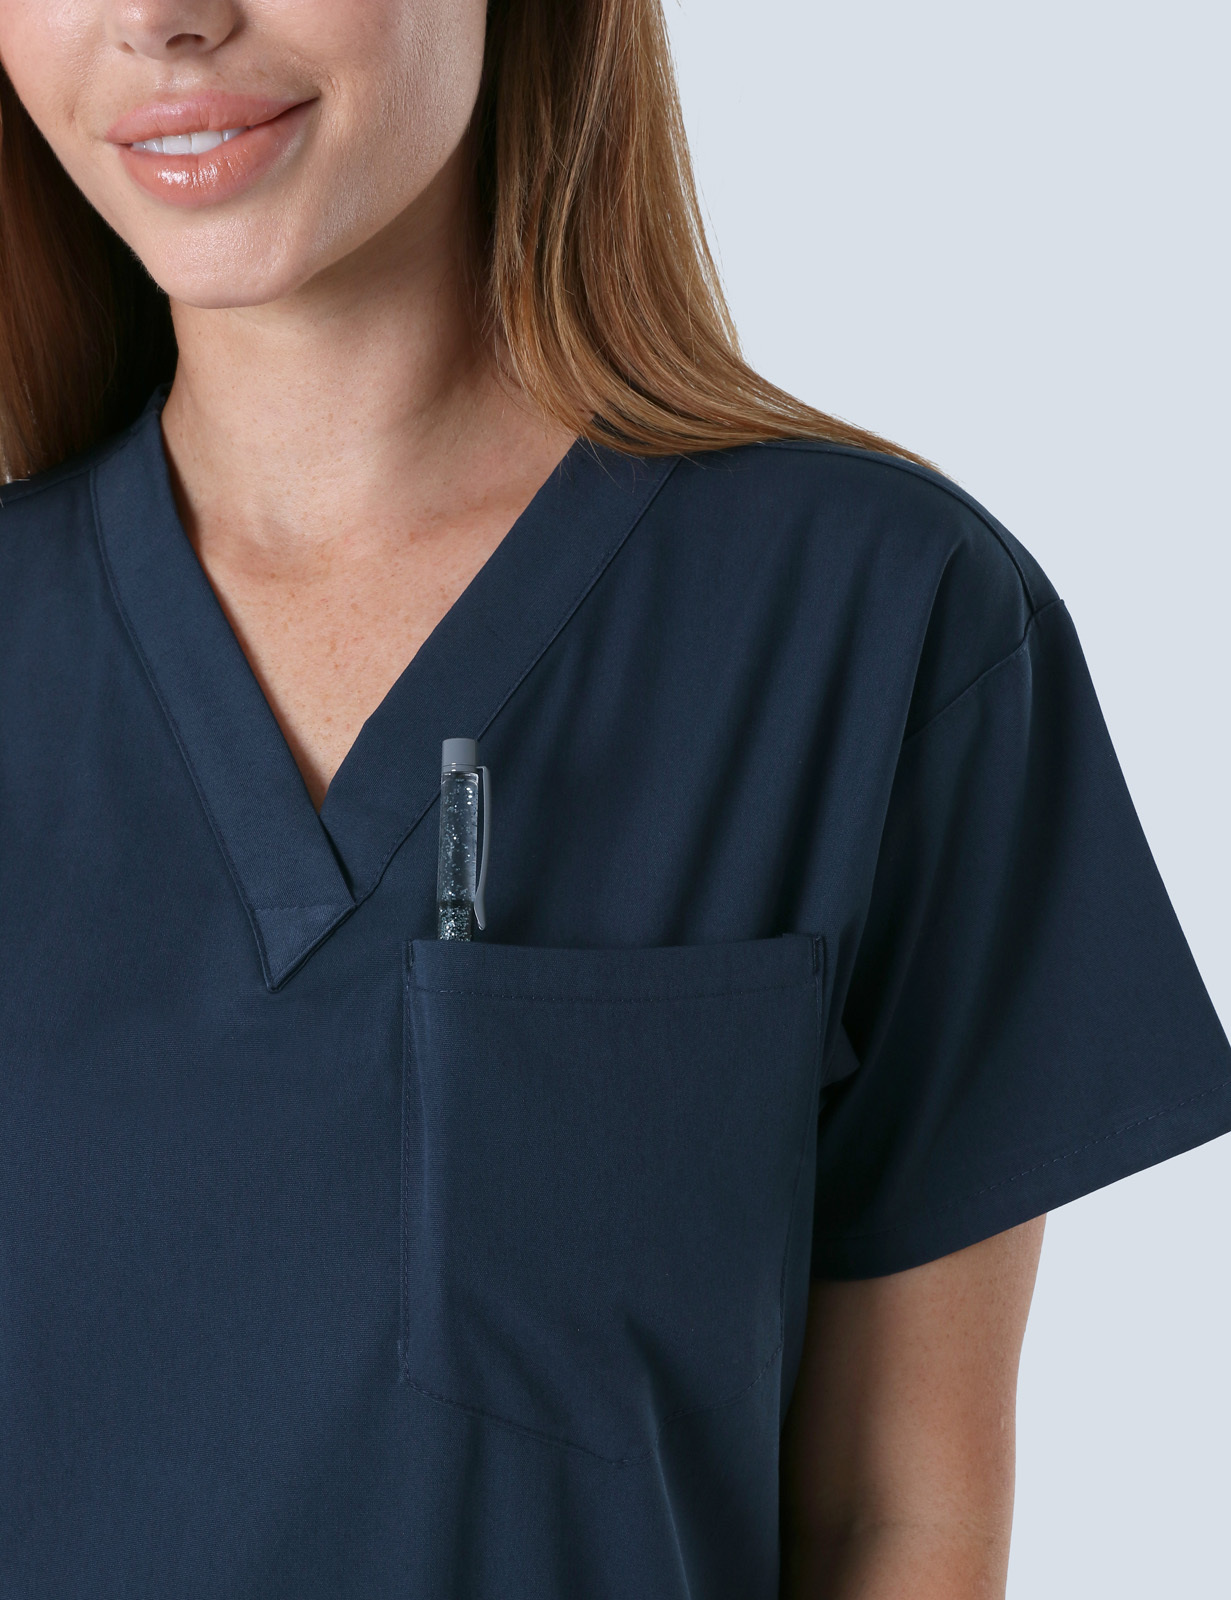 Canberra Hospital - ED Nurse (4 Pocket Scrub Top and Cargo Pants in Navy incl Logos)